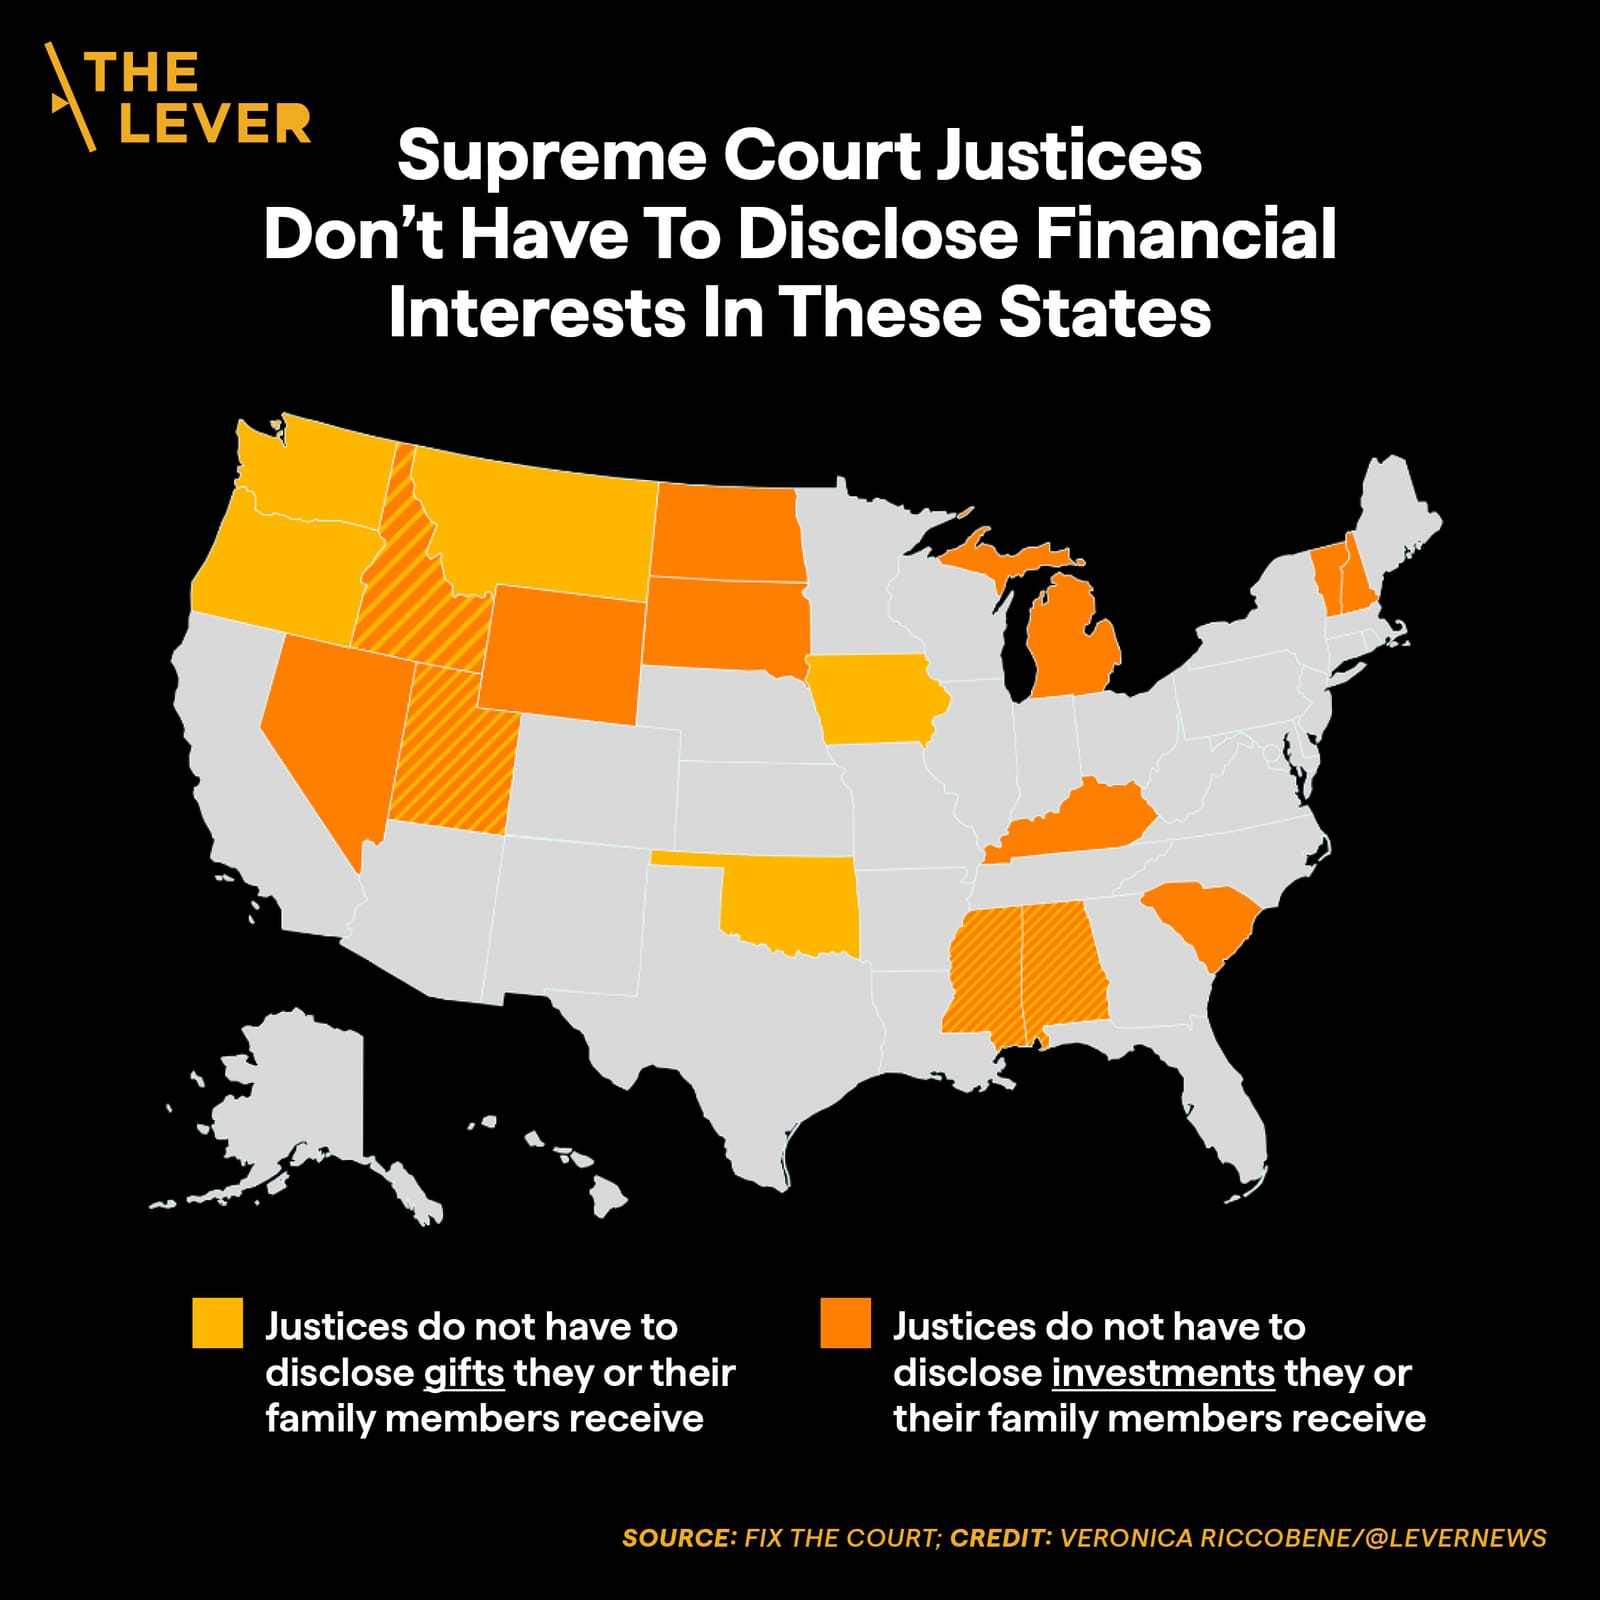 A map of the US showing in which states Supreme Court Justices don't have to disclose financial interests.